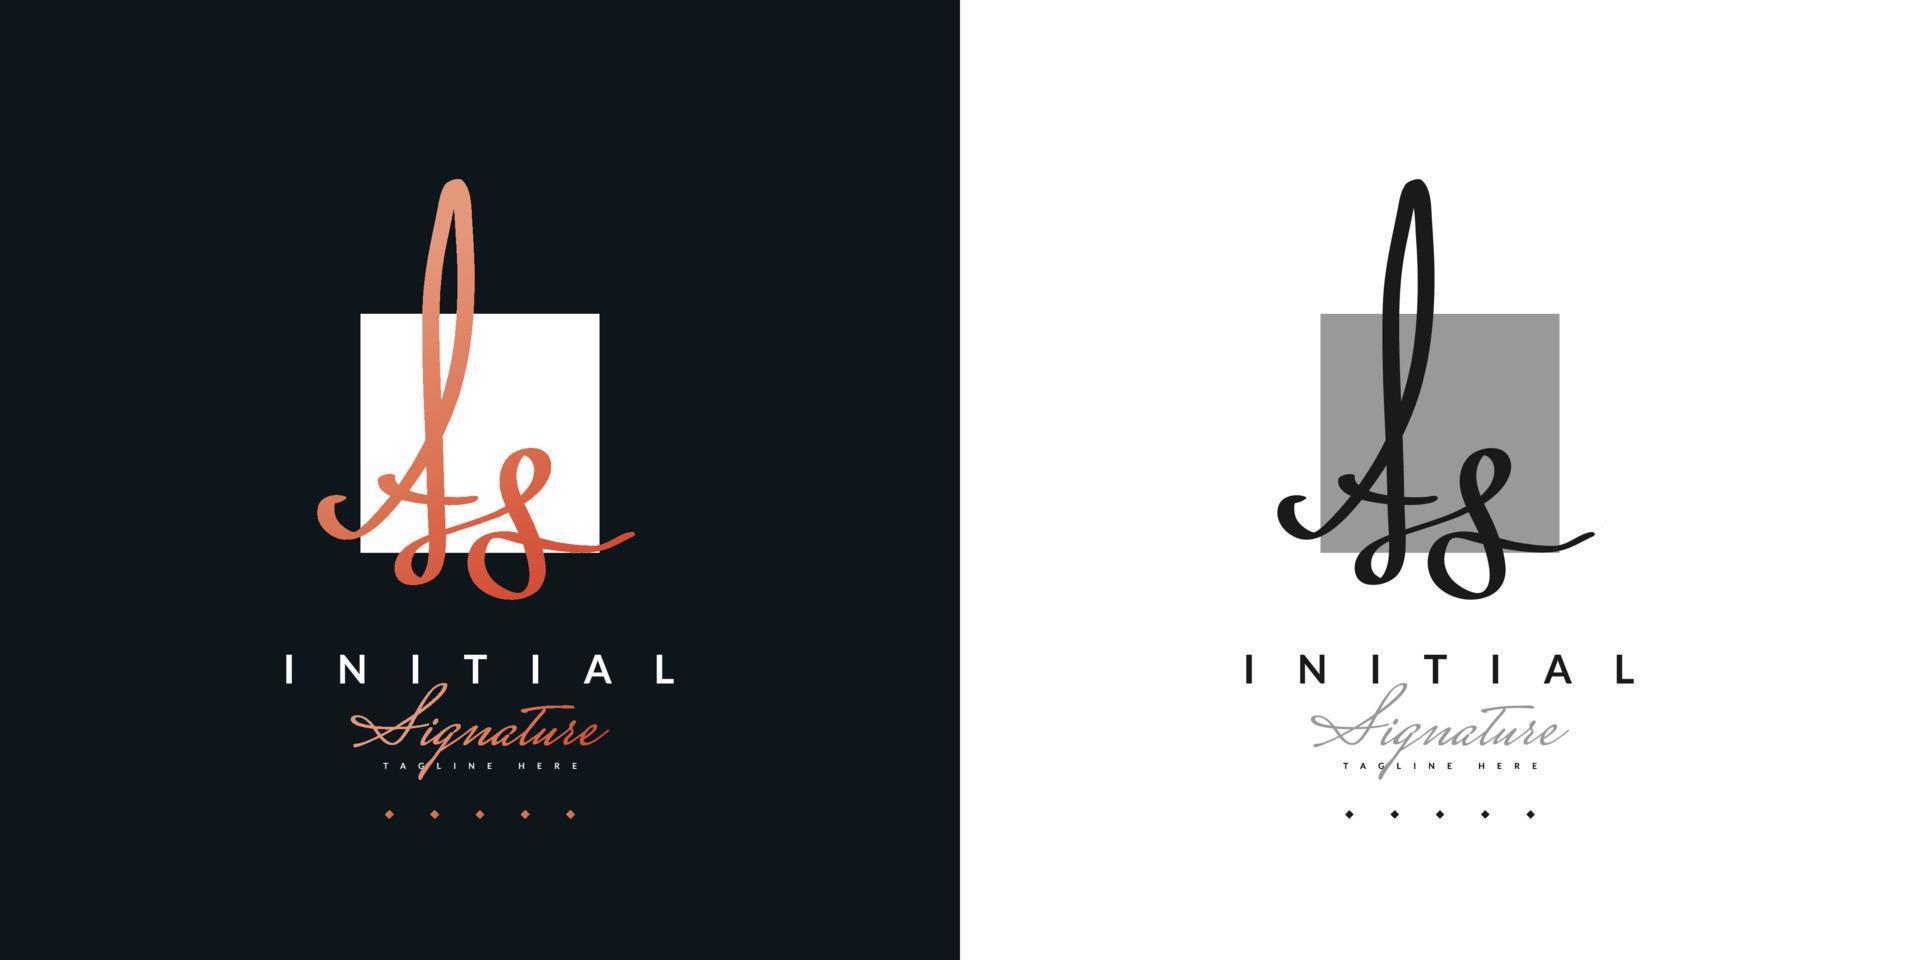 Elegant Initial A and S Logo Design with Handwriting Style in Gold Gradient. AS Signature Logo or Symbol for Wedding, Fashion, Jewelry, Boutique, Botanical, Floral and Business Identity vector